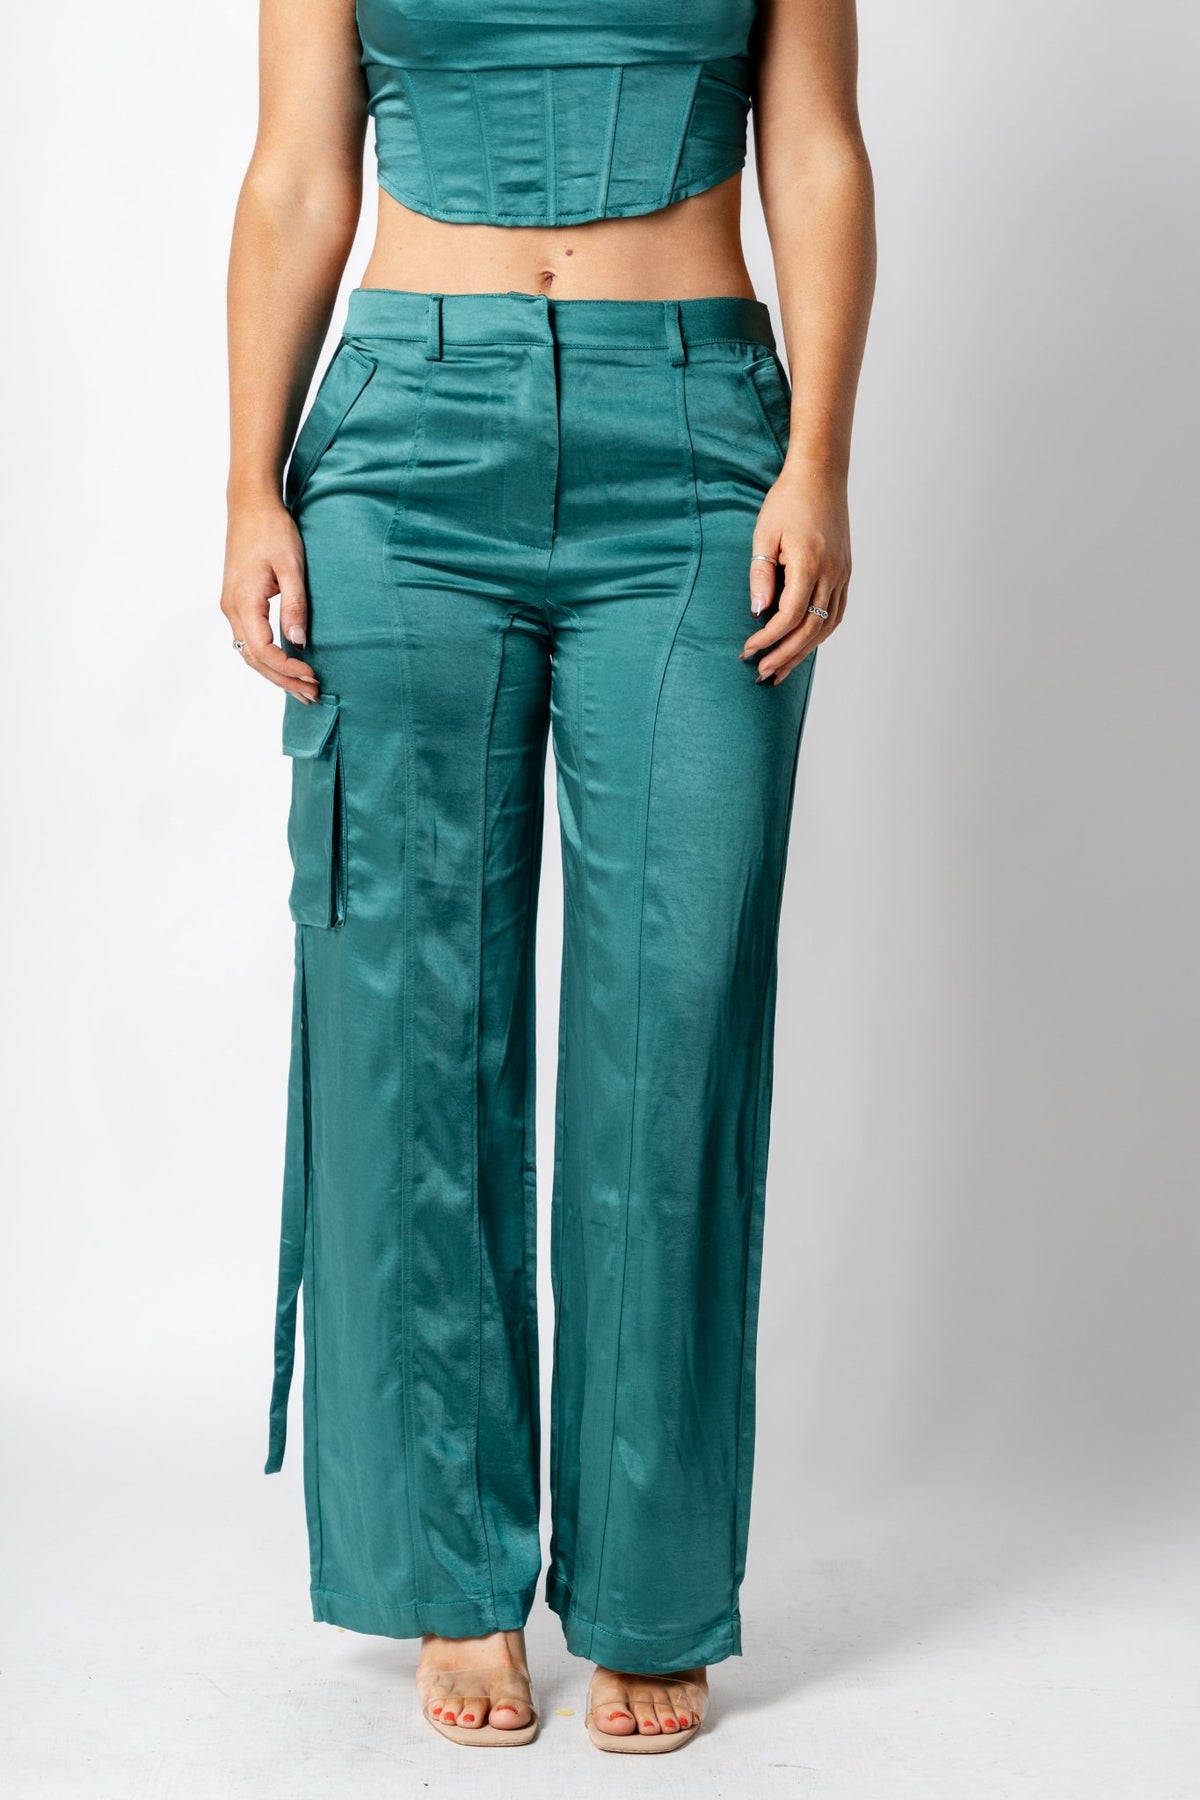 Satin wide leg cargo pants forest green - Trendy Holiday Apparel at Lush Fashion Lounge Boutique in Oklahoma City